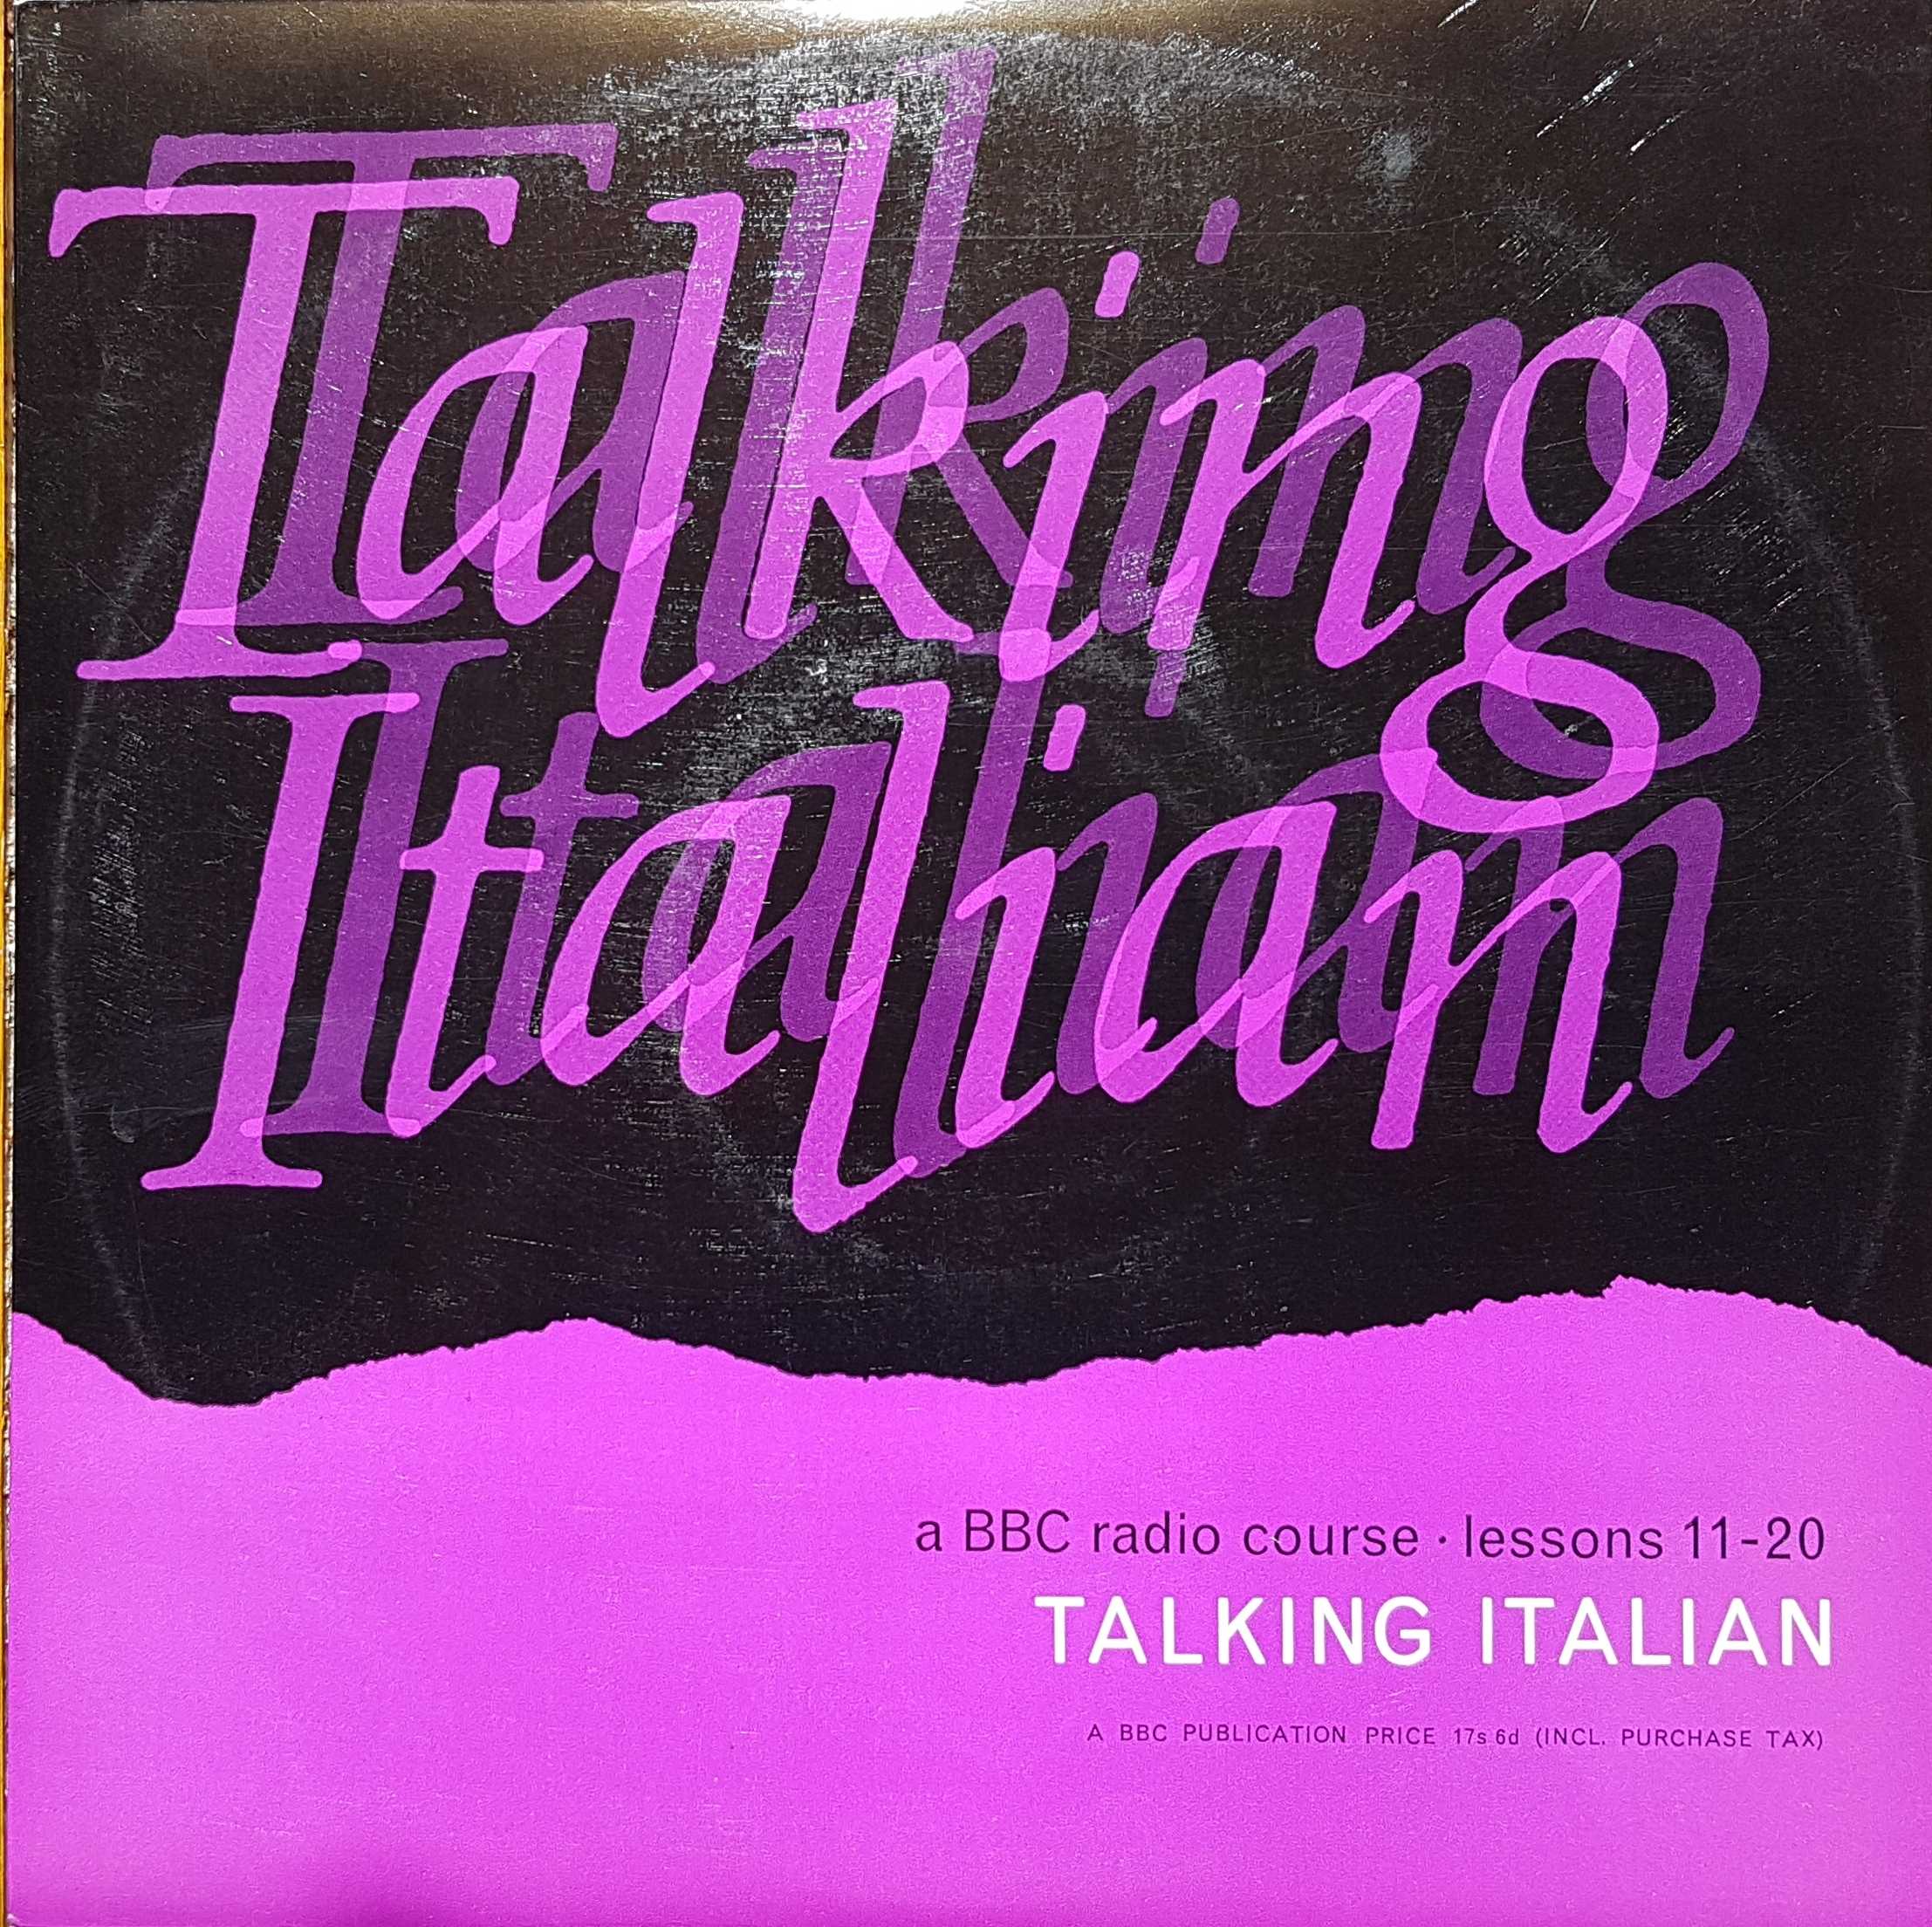 Picture of Talking Italian - Lessons 11 - 20 by artist Pietro Giorgetti from the BBC albums - Records and Tapes library